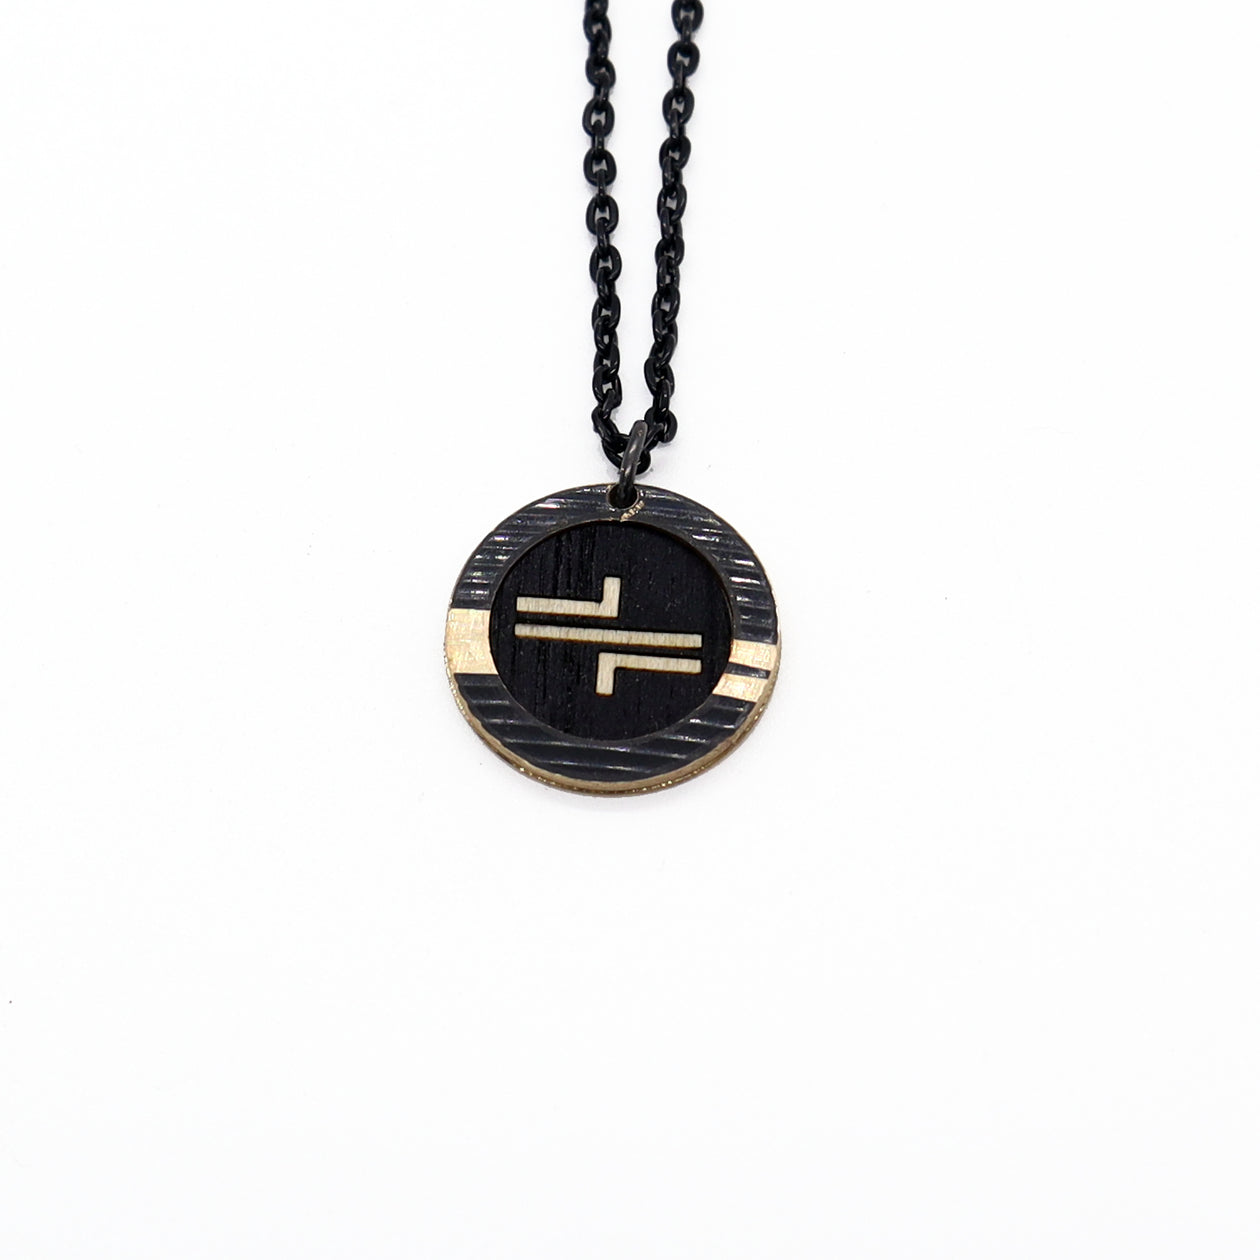 Thrice Dark Inlay - Reclaimed Cymbal Necklace